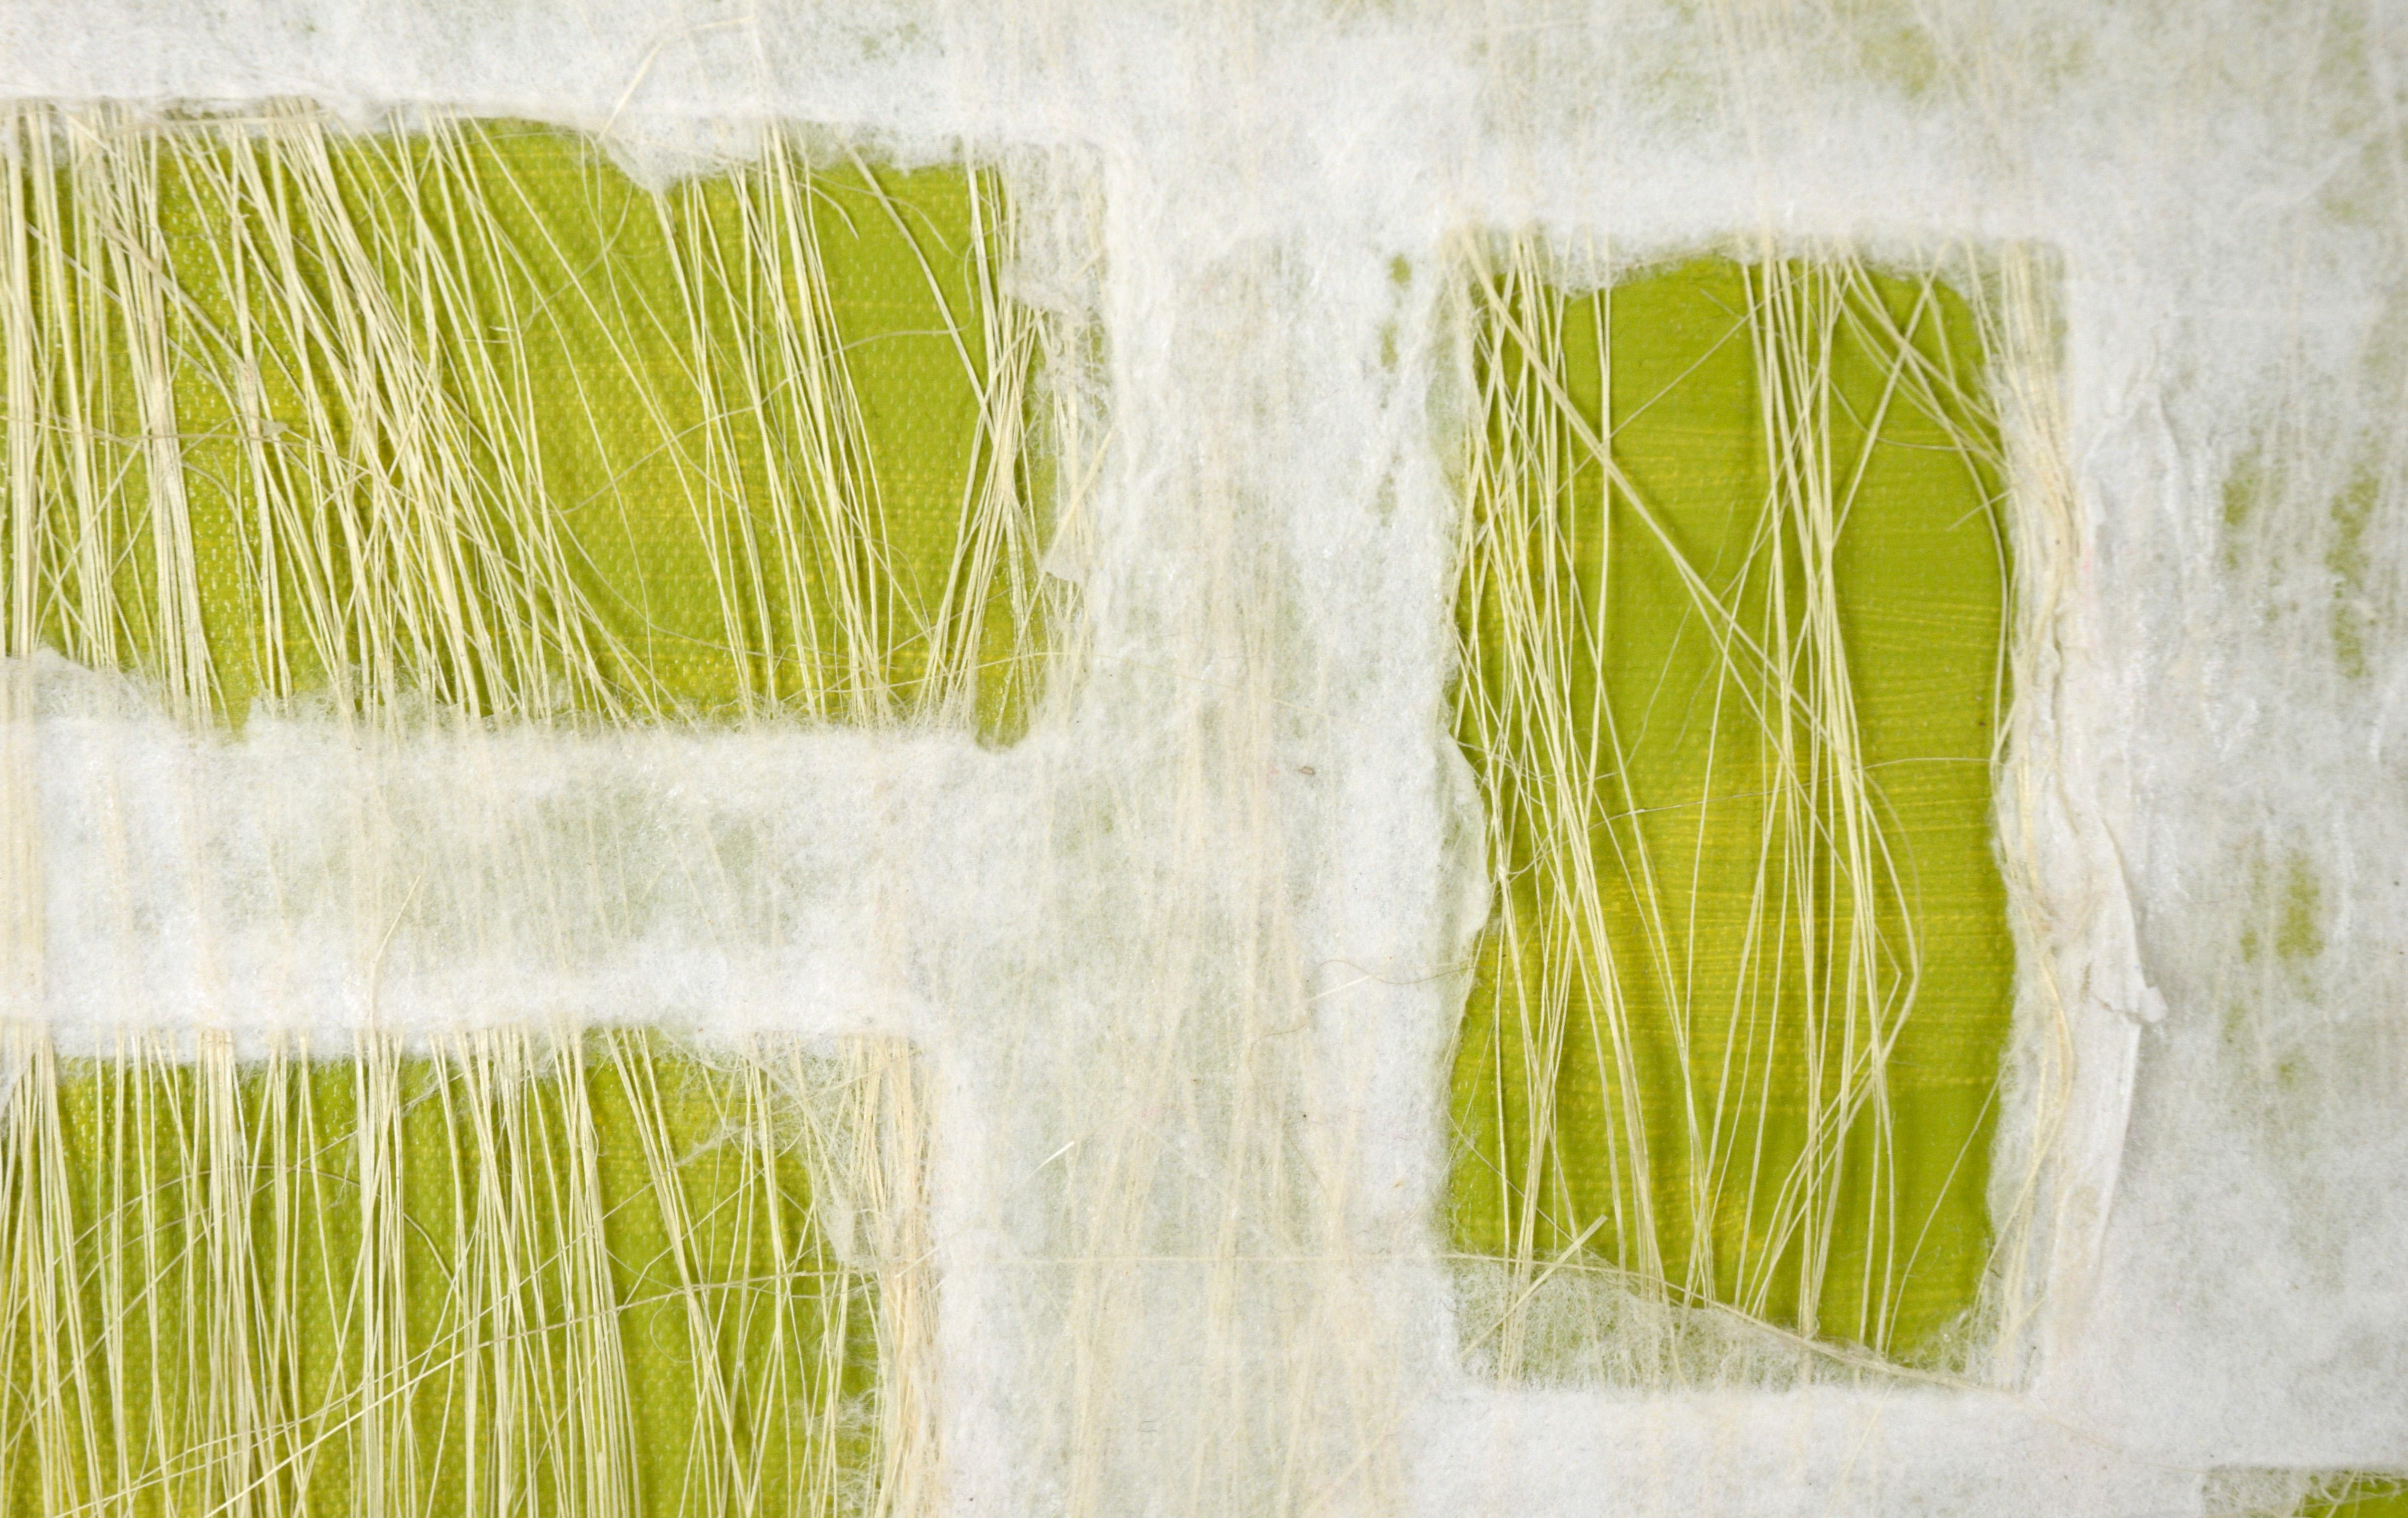 Abstract Geometric Composition with Paper, Fibers, and Acrylic on Canvas (Green) - Painting by Unknown